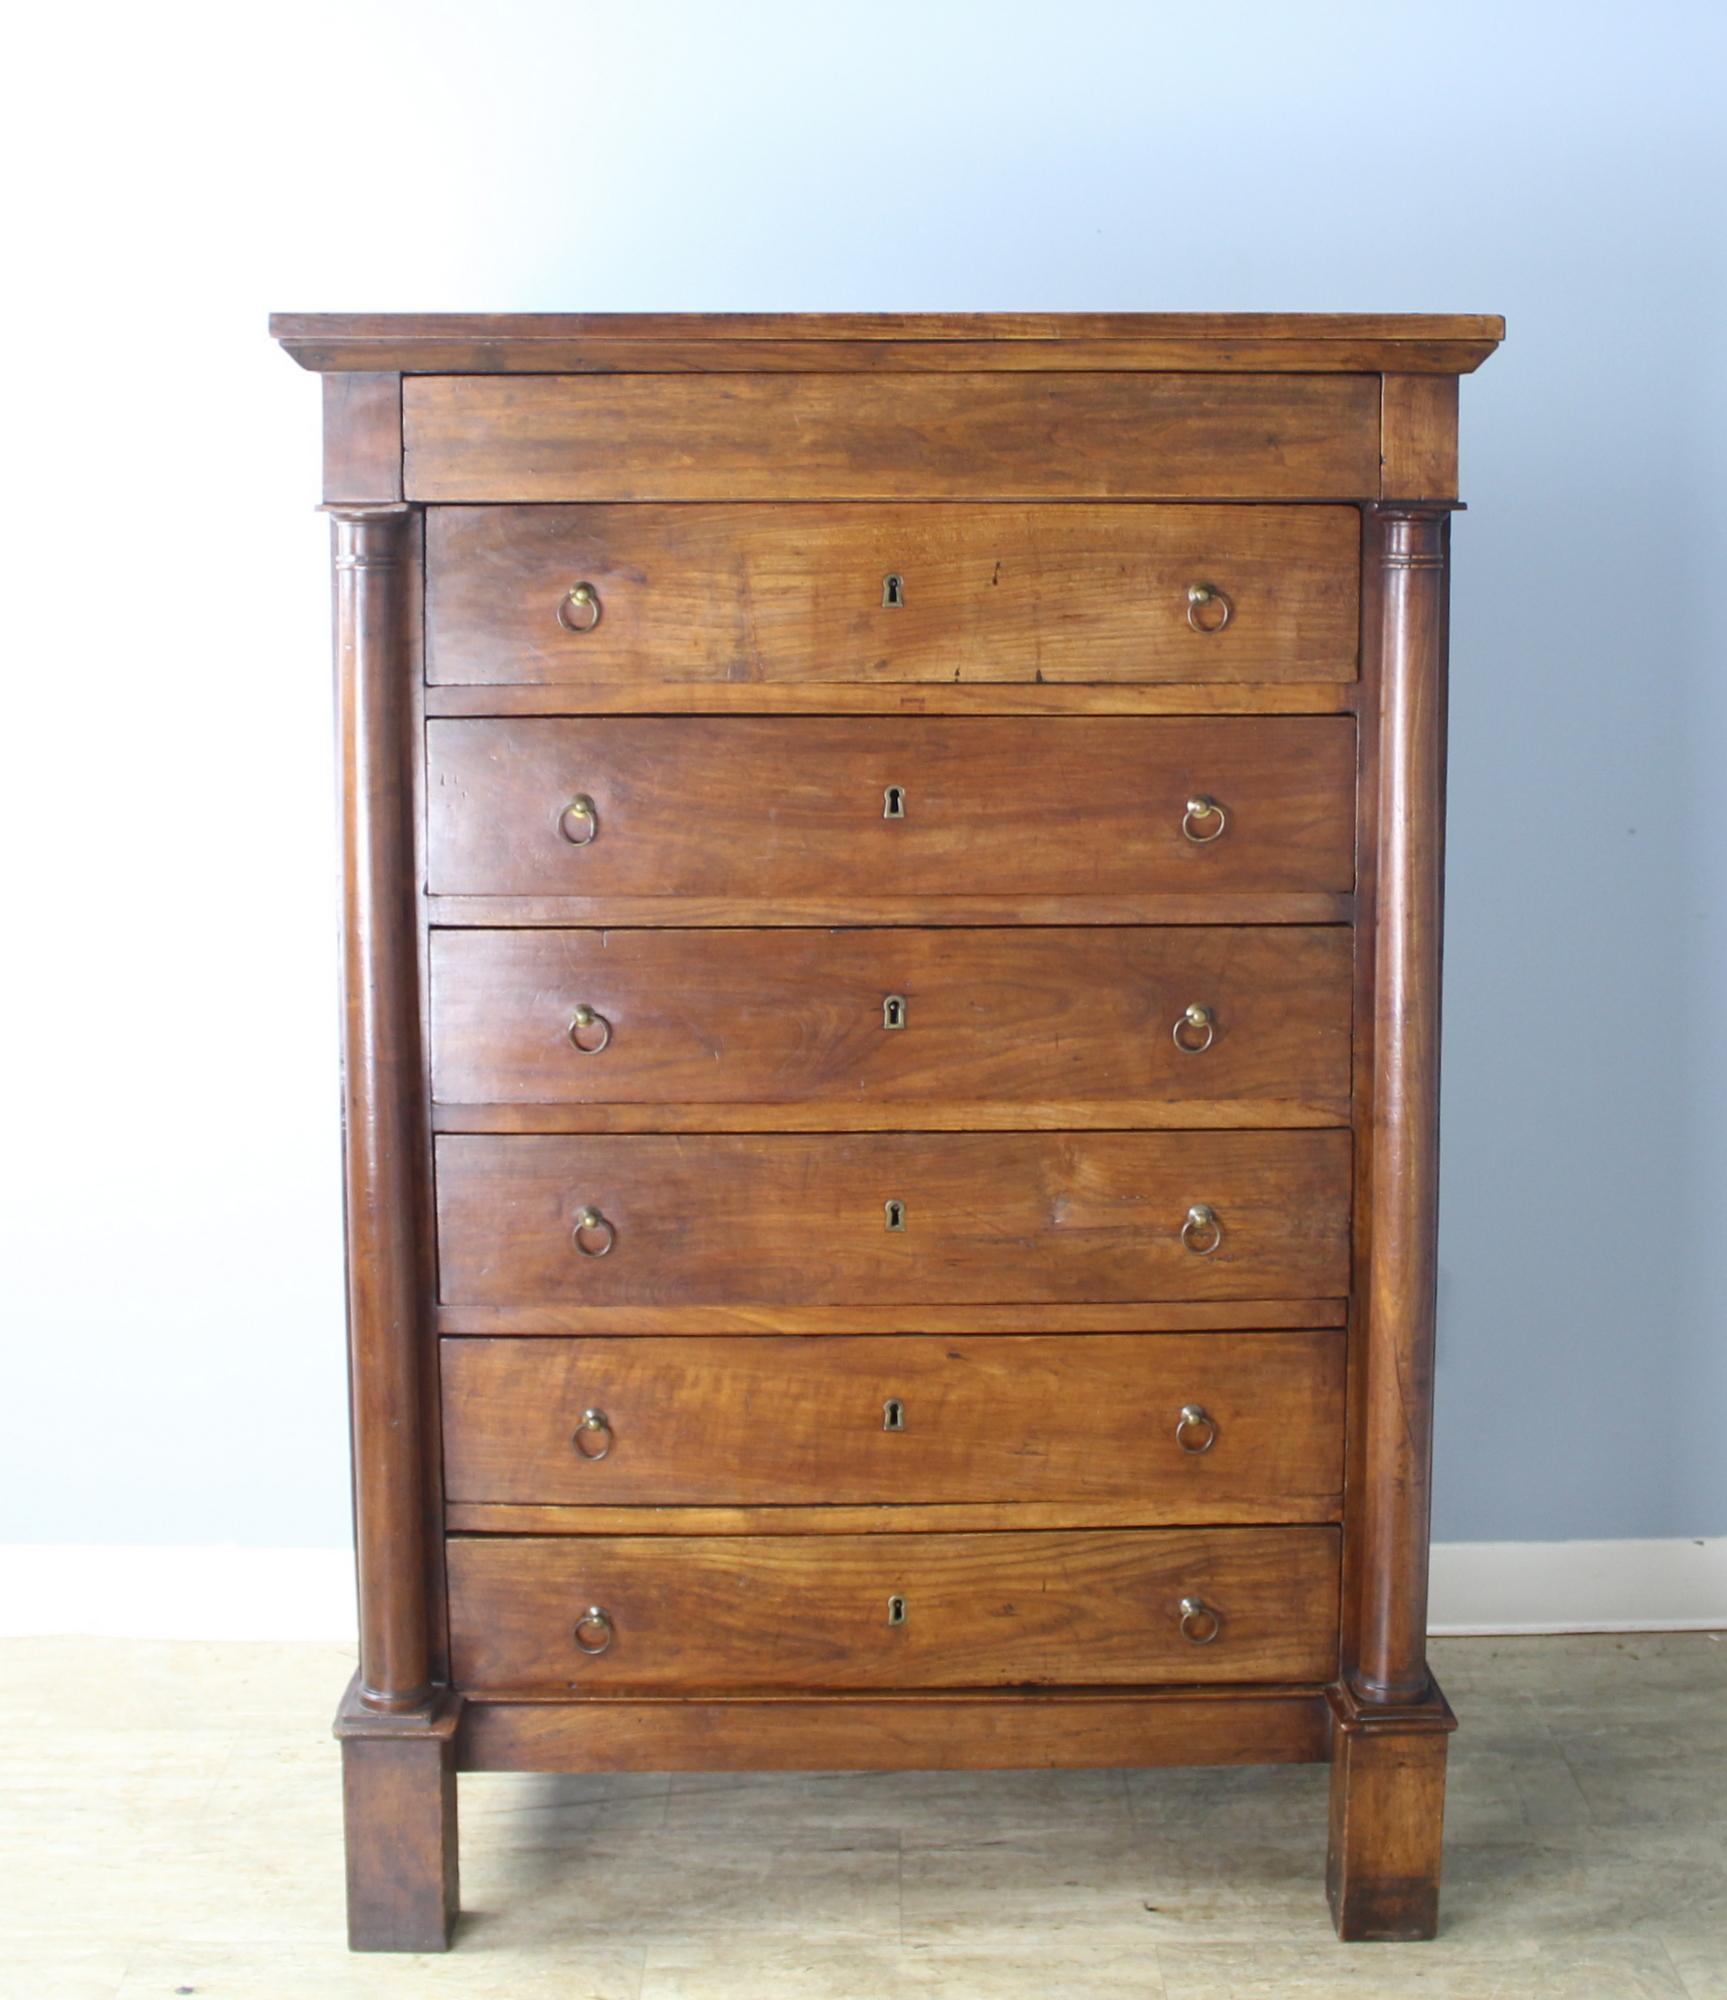 A handsome French cherry wood dresser with seven drawers, one for each day of the week. Nice Directoire column detail and block feet. The top has some small marks of distress, but the piece is in over all very good antique condition.